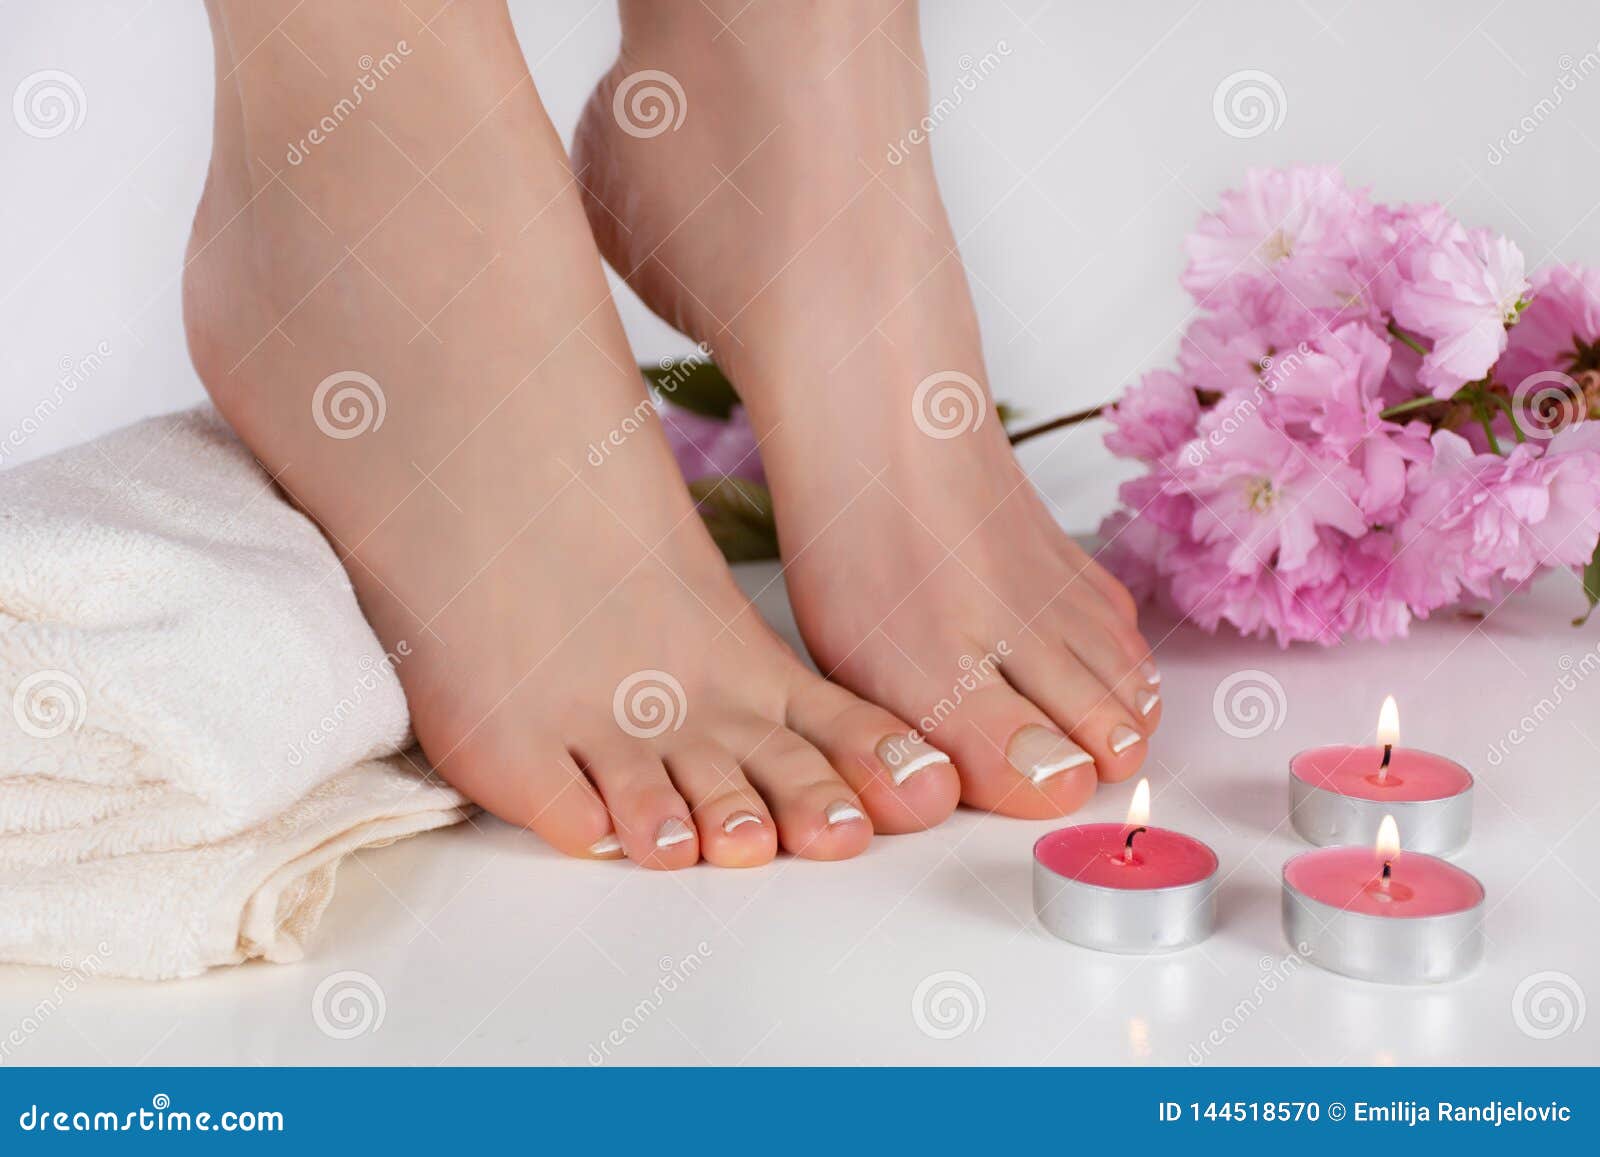 Beautiful Bare Feet Porn - Female Bare Feet with French Nails Polish on White Towel and Decorative  Candle Burning on Table and Pink Flower. Feet Fetish Stock Photo - Image of  female, beauty: 144518570